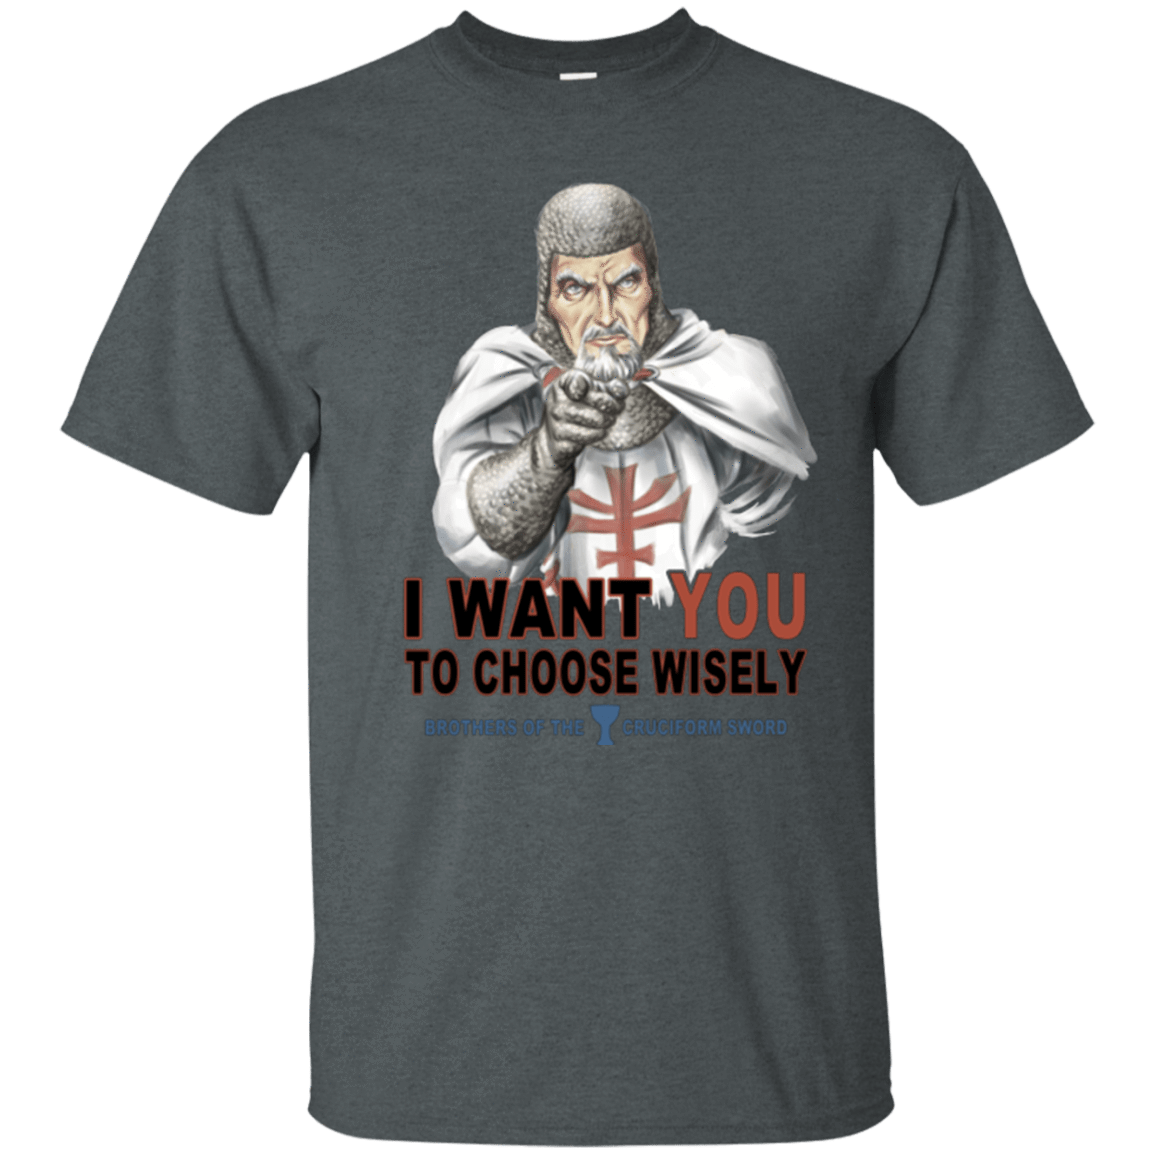 T-Shirts Dark Heather / Small Choose Wisely T-Shirt